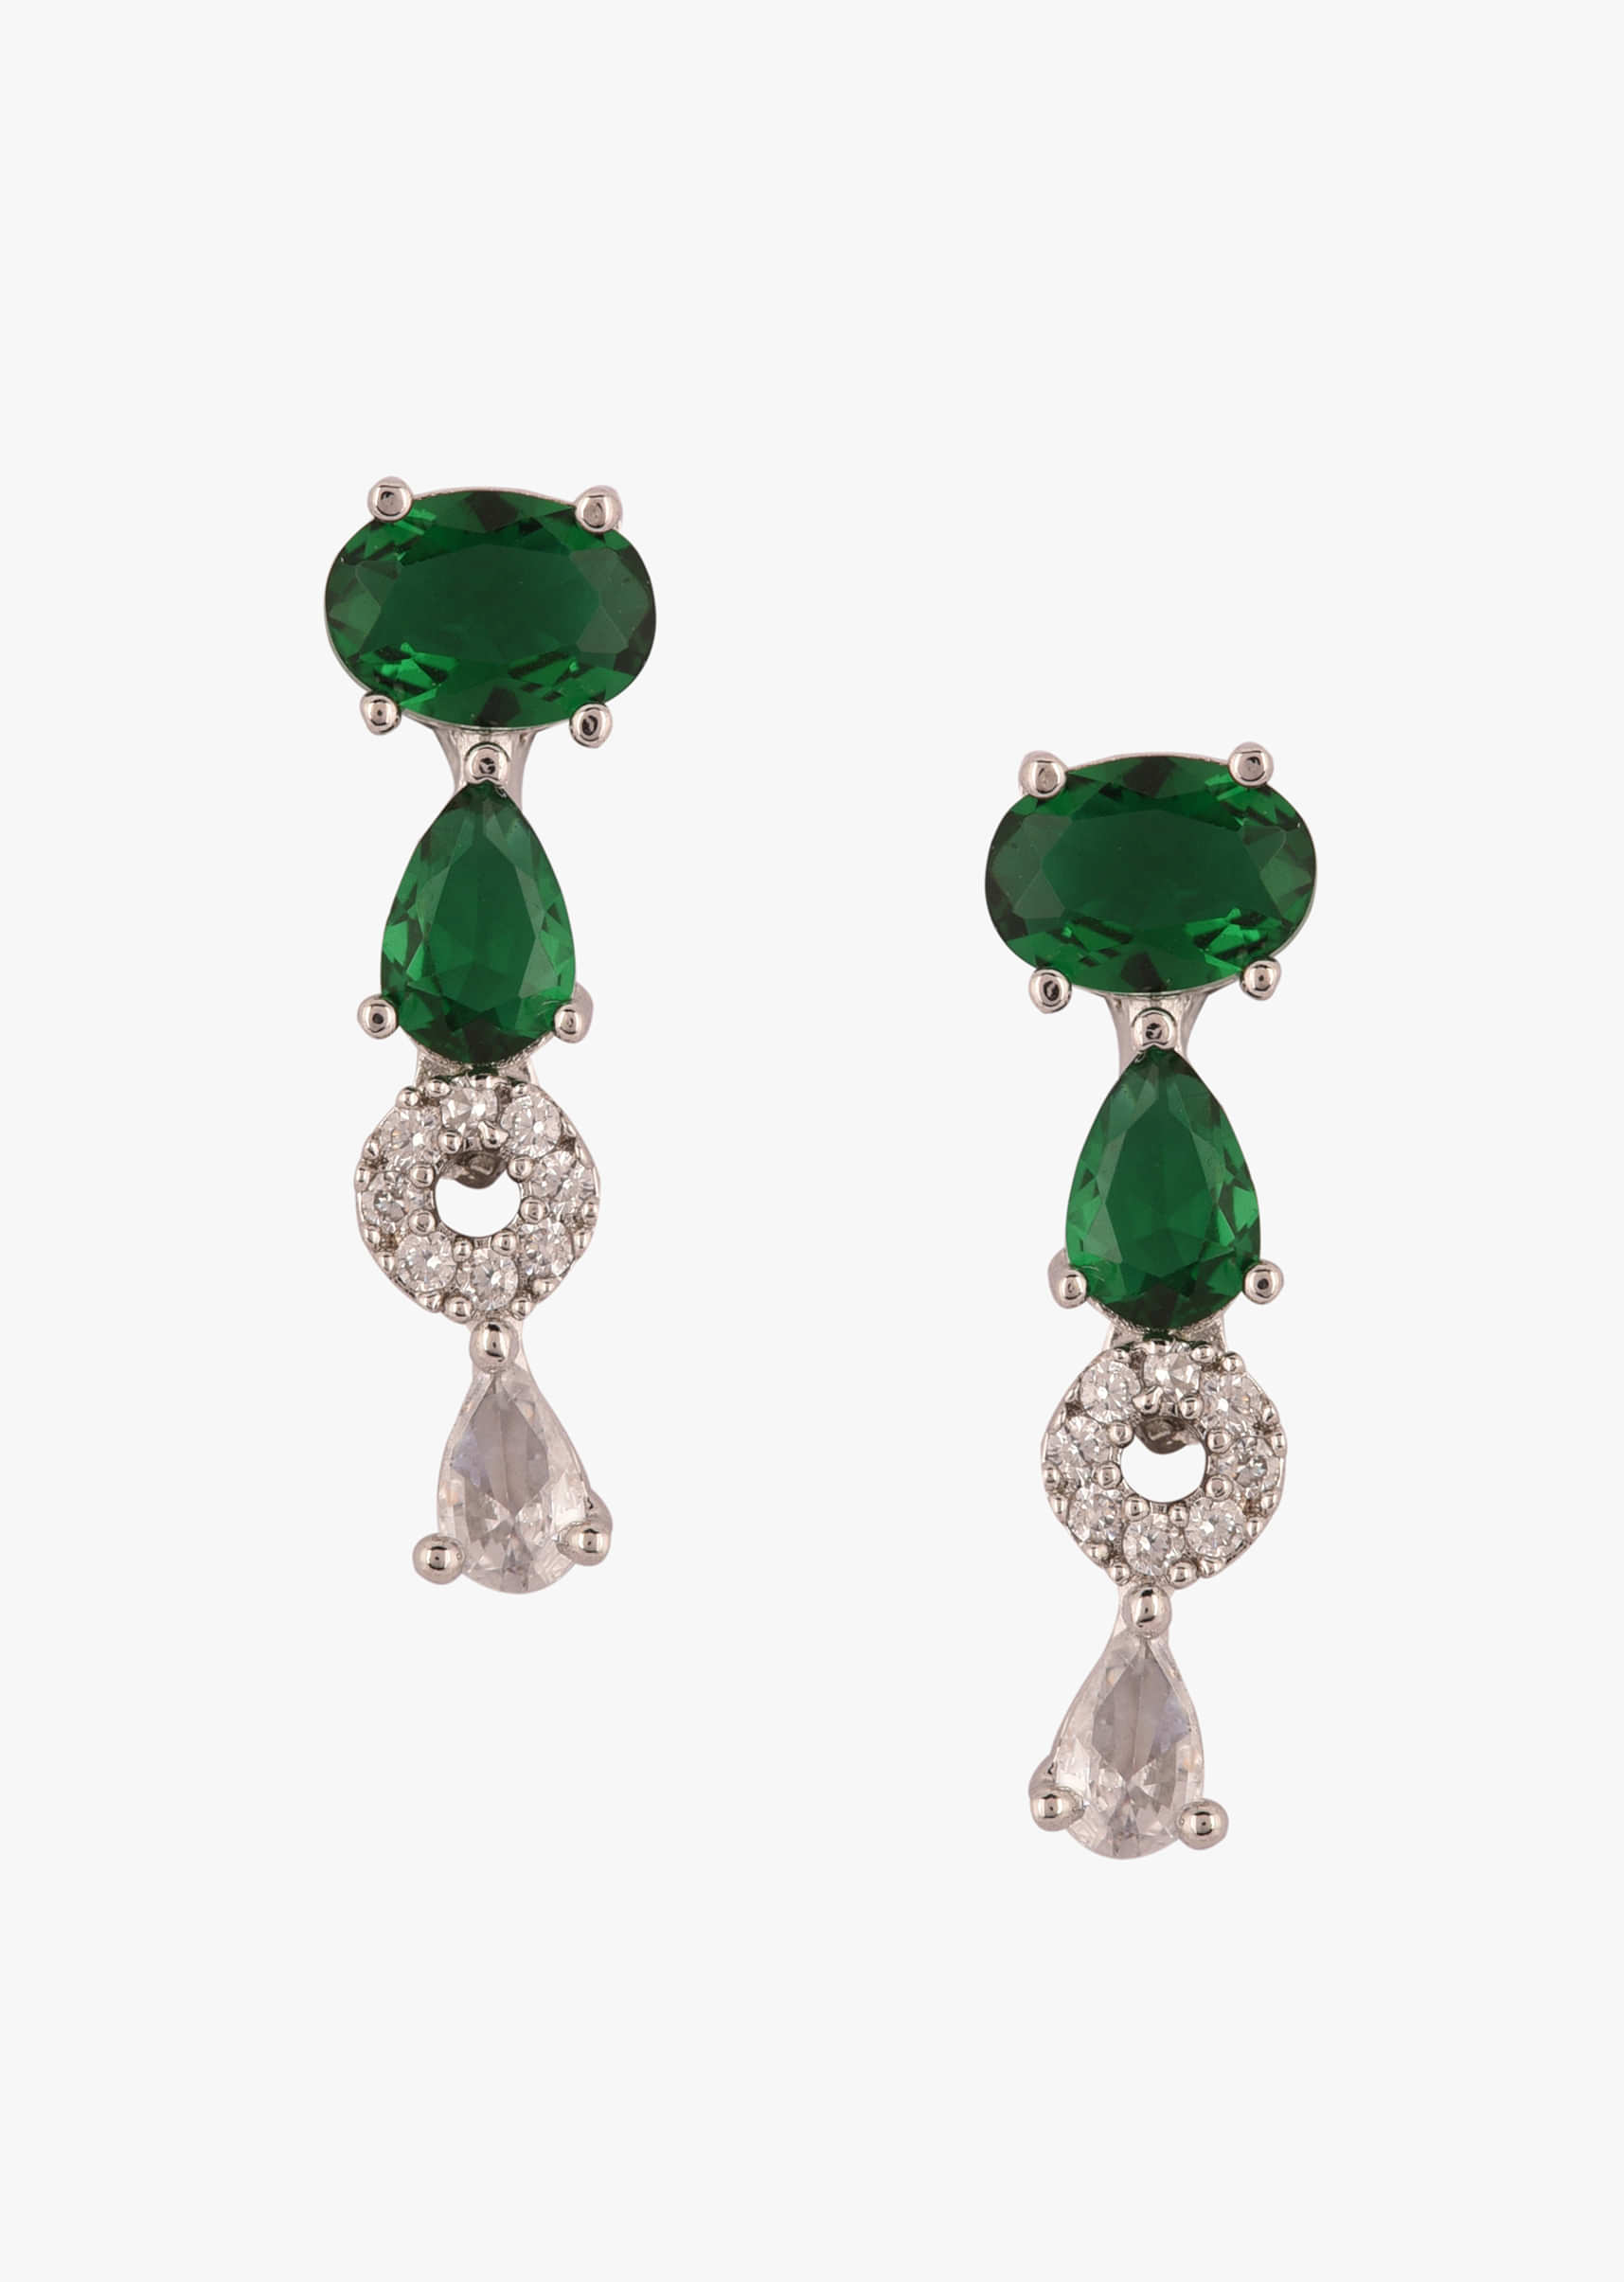 Two-Tier Diamond Necklace Set In Silver Plating With Emerald Stones